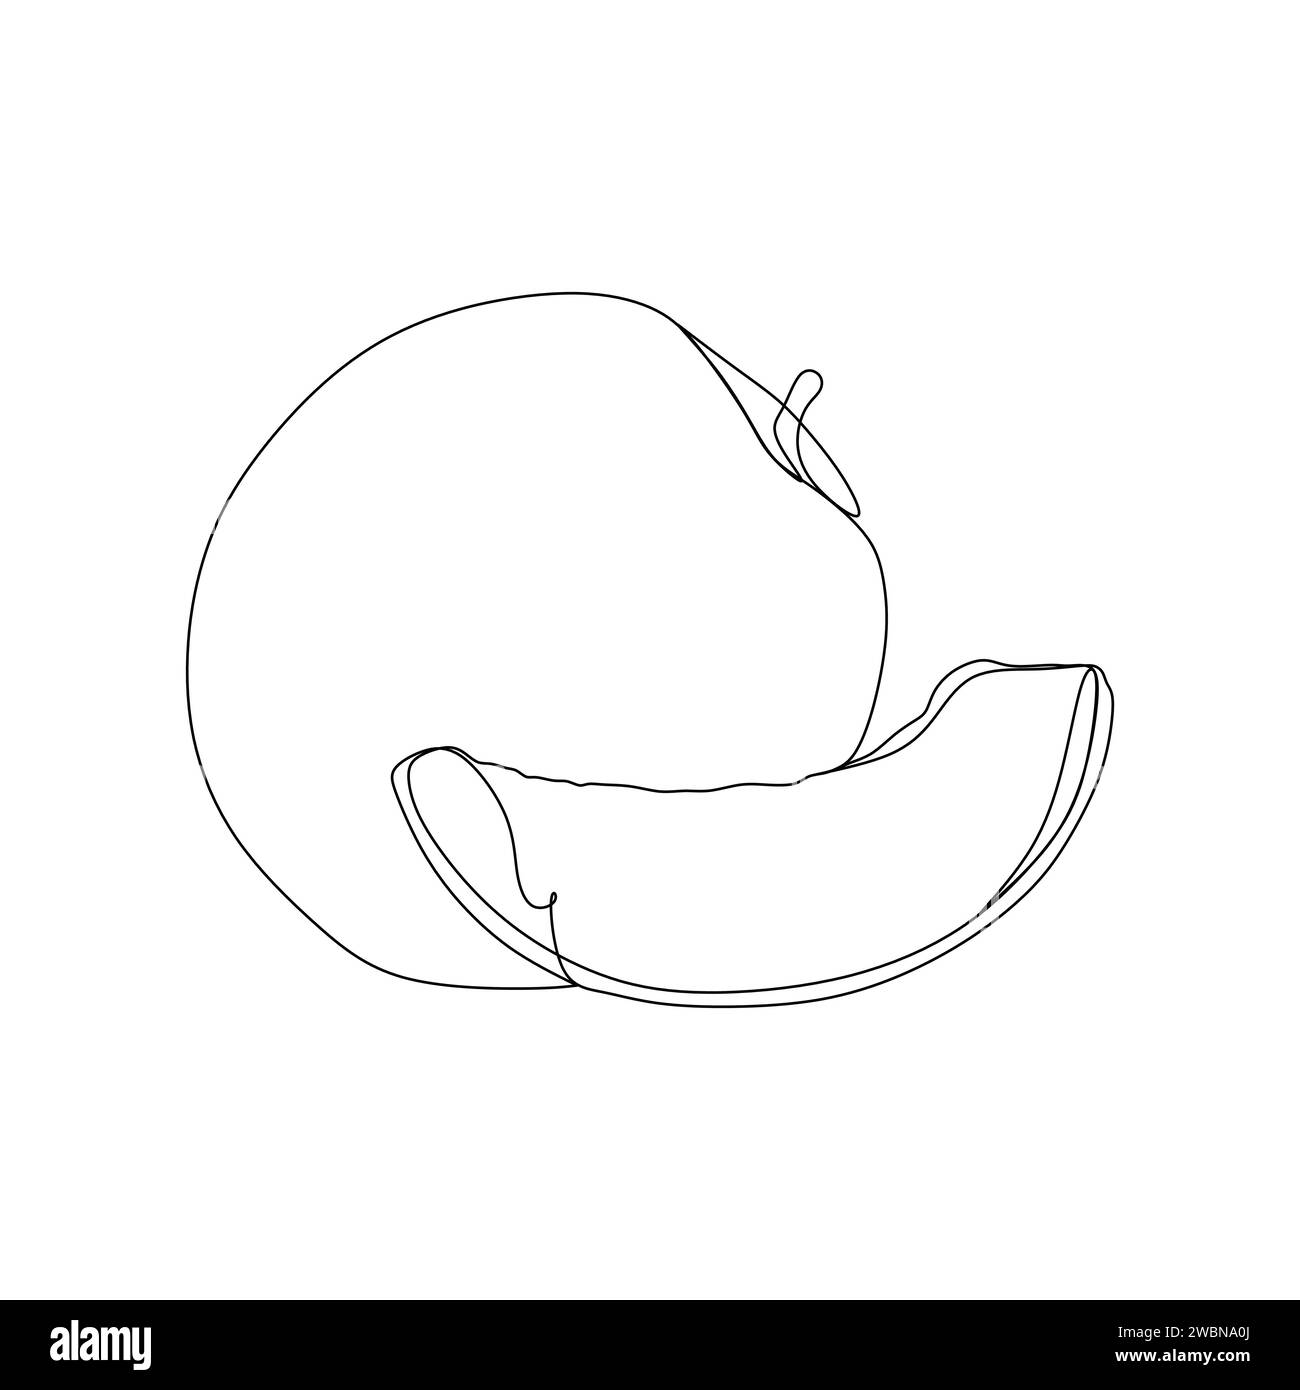 Continuous one line drawing of a mandarin. Vector illustration for food and nature design element or concept Stock Vector